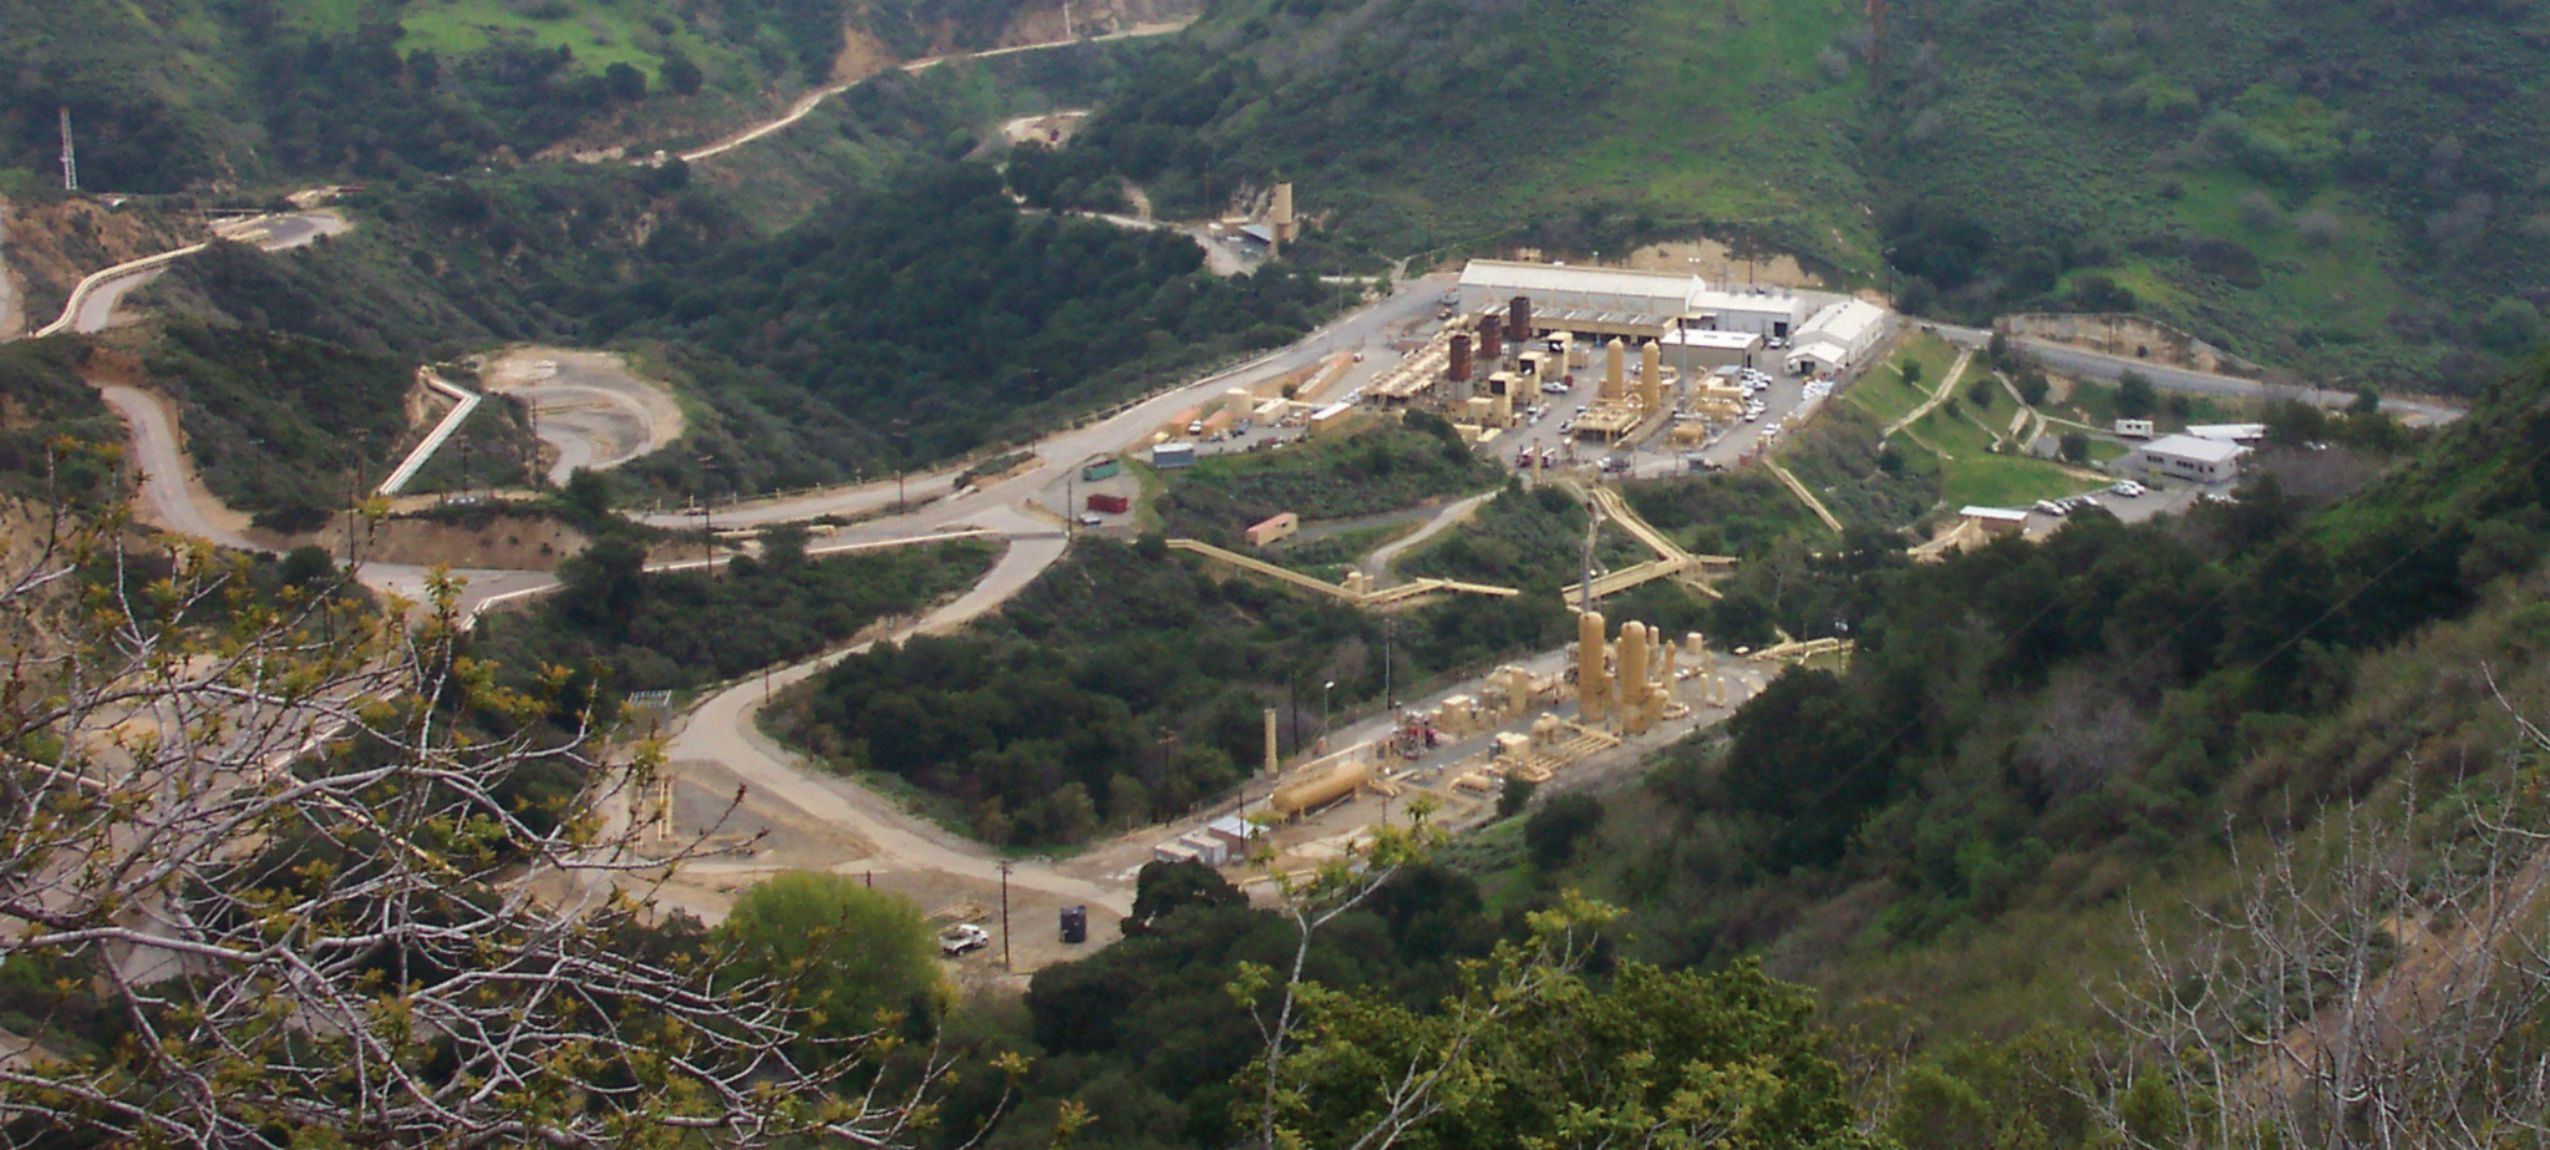 Aliso Canyon Turbine Replacement